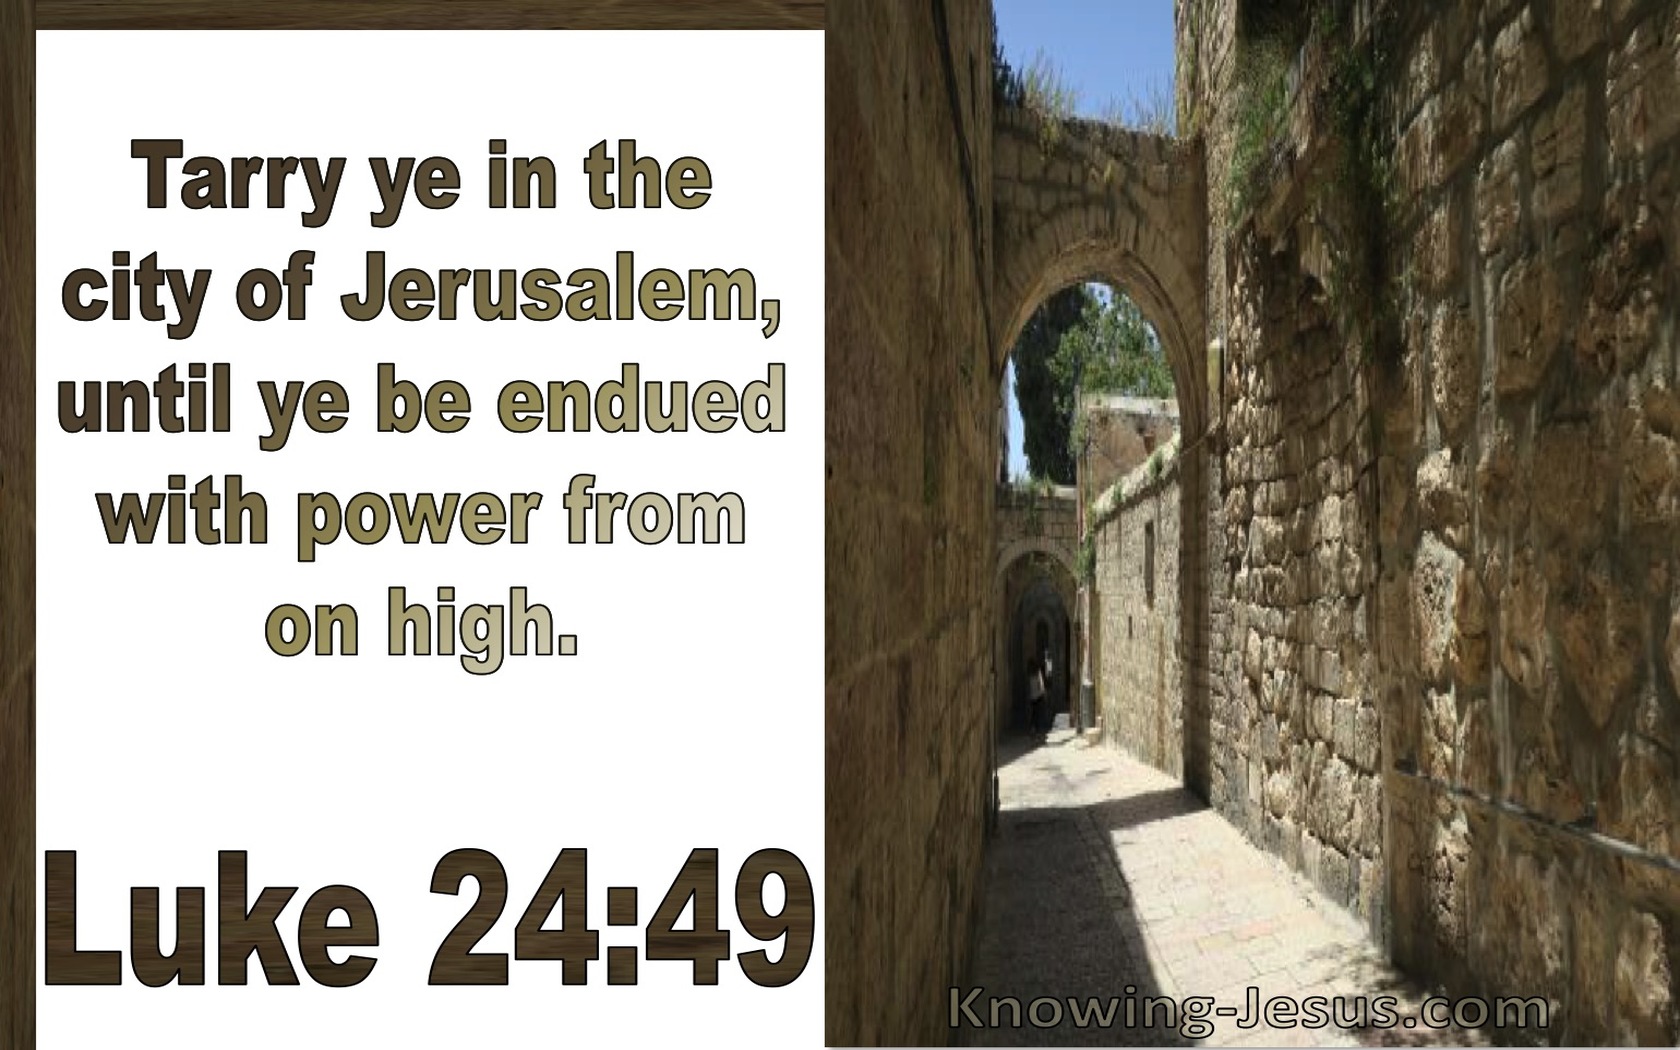 Luke 24:49 Tarry In The City Of Jerusalem Unto You Are Endued With Power From On High (utmost)05:27